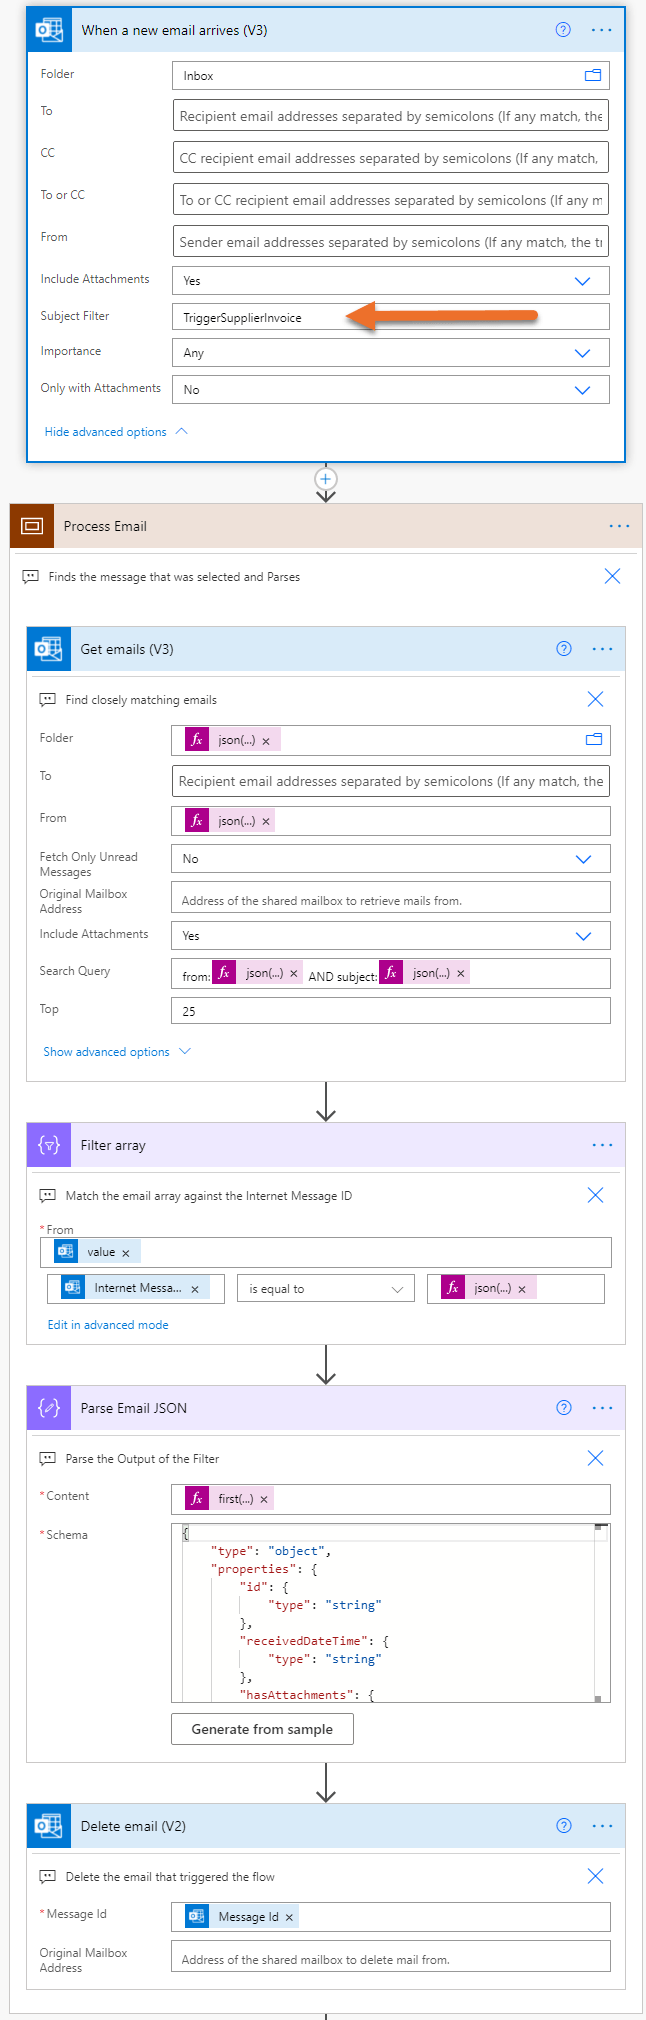 Image of a Power Automate flow that is triggered for a selected email in Outlook